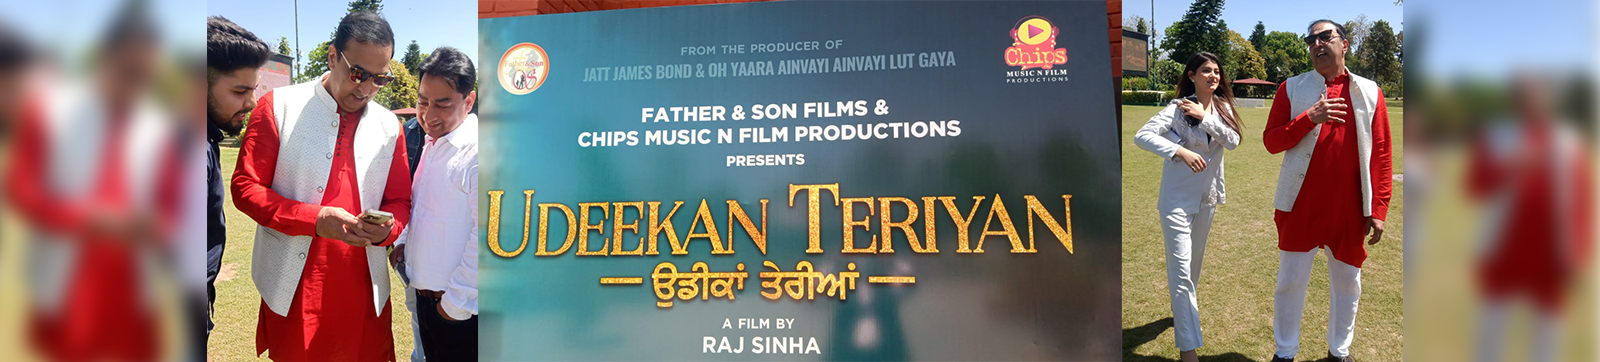 Punjabi Film ‘Udeekan Teriyan’ Touches an Emotive Issue, Find Out on April 14